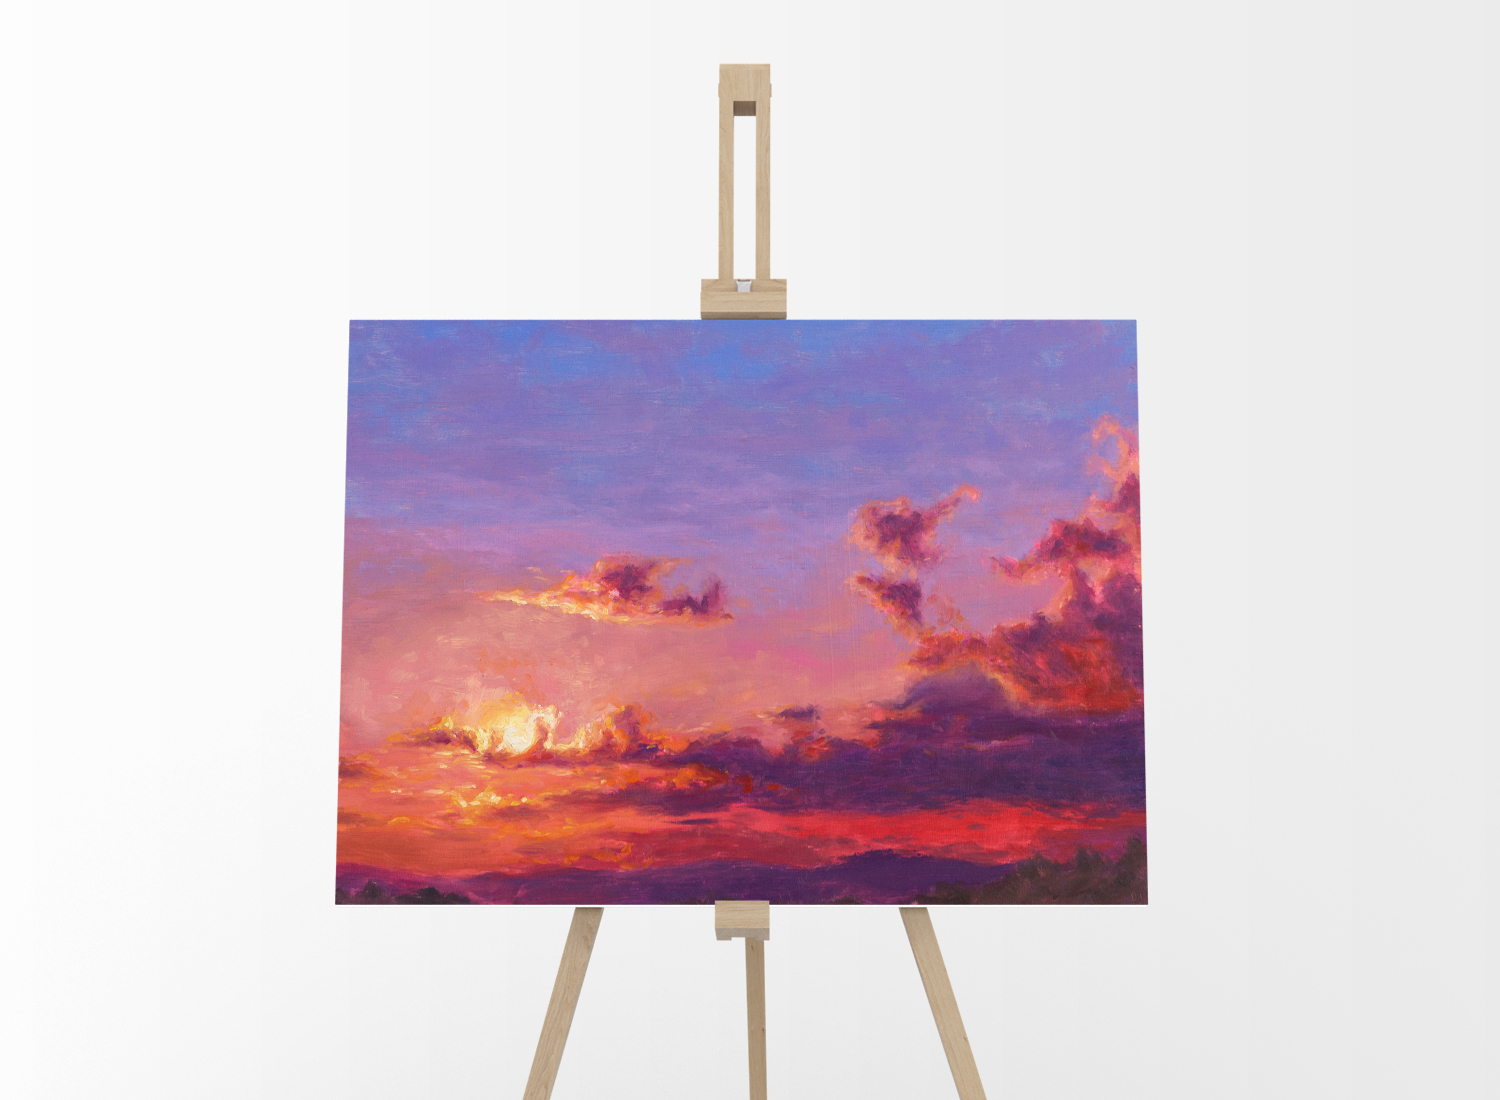 The Spark of Life Sky Landscape Original Oil Painting Andrew Gaia on Easel